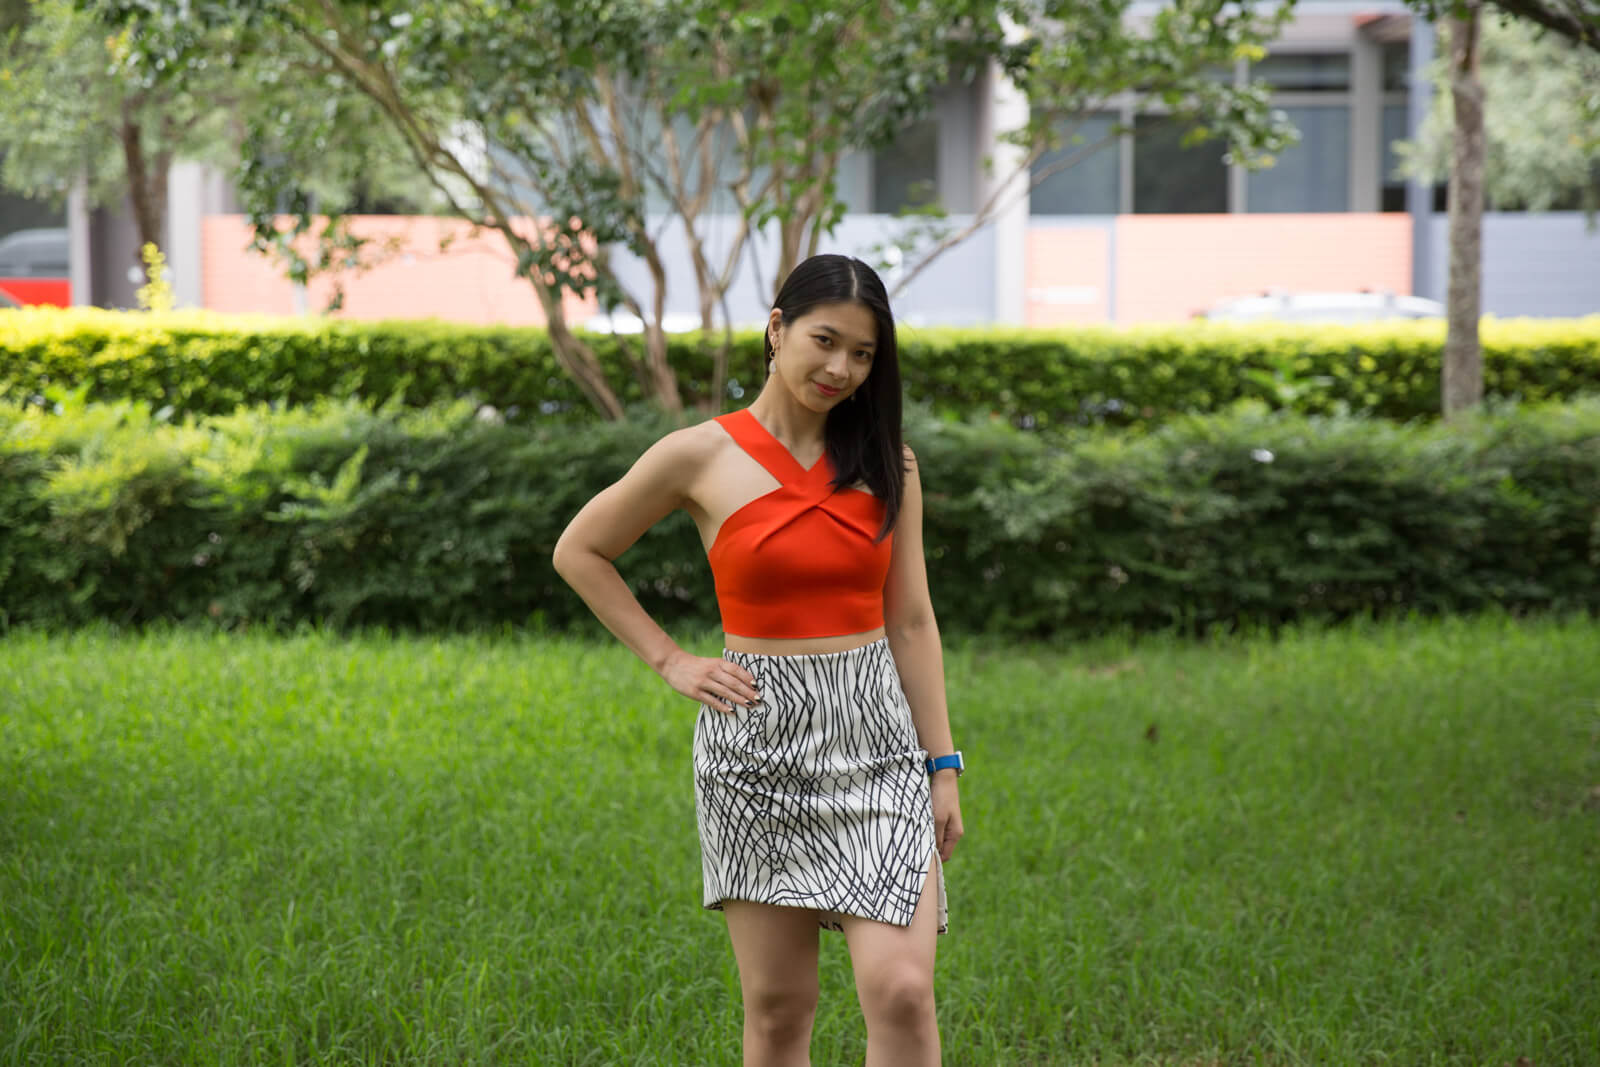 A woman with short dark hair wearing an orange crop that crosses at the neck. Her skirt is white with an abstract black print. She is standing in a very green garden with hedging in the background and has a hand on her hip.